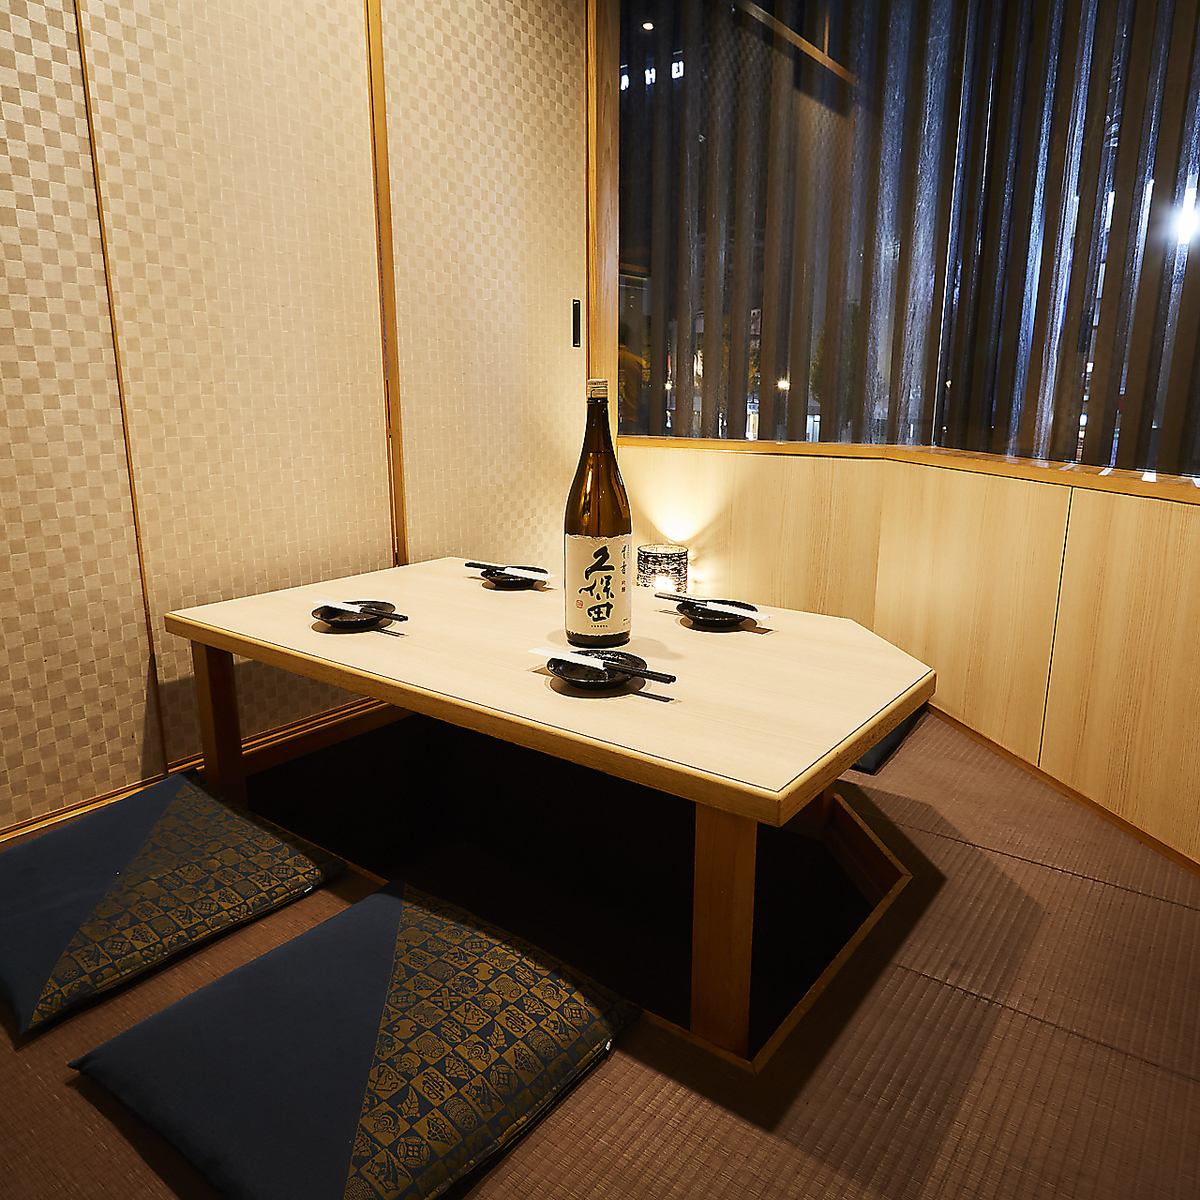 Conveniently located right next to Toyama Station! We will guide you to the best seat according to the number of people and purpose